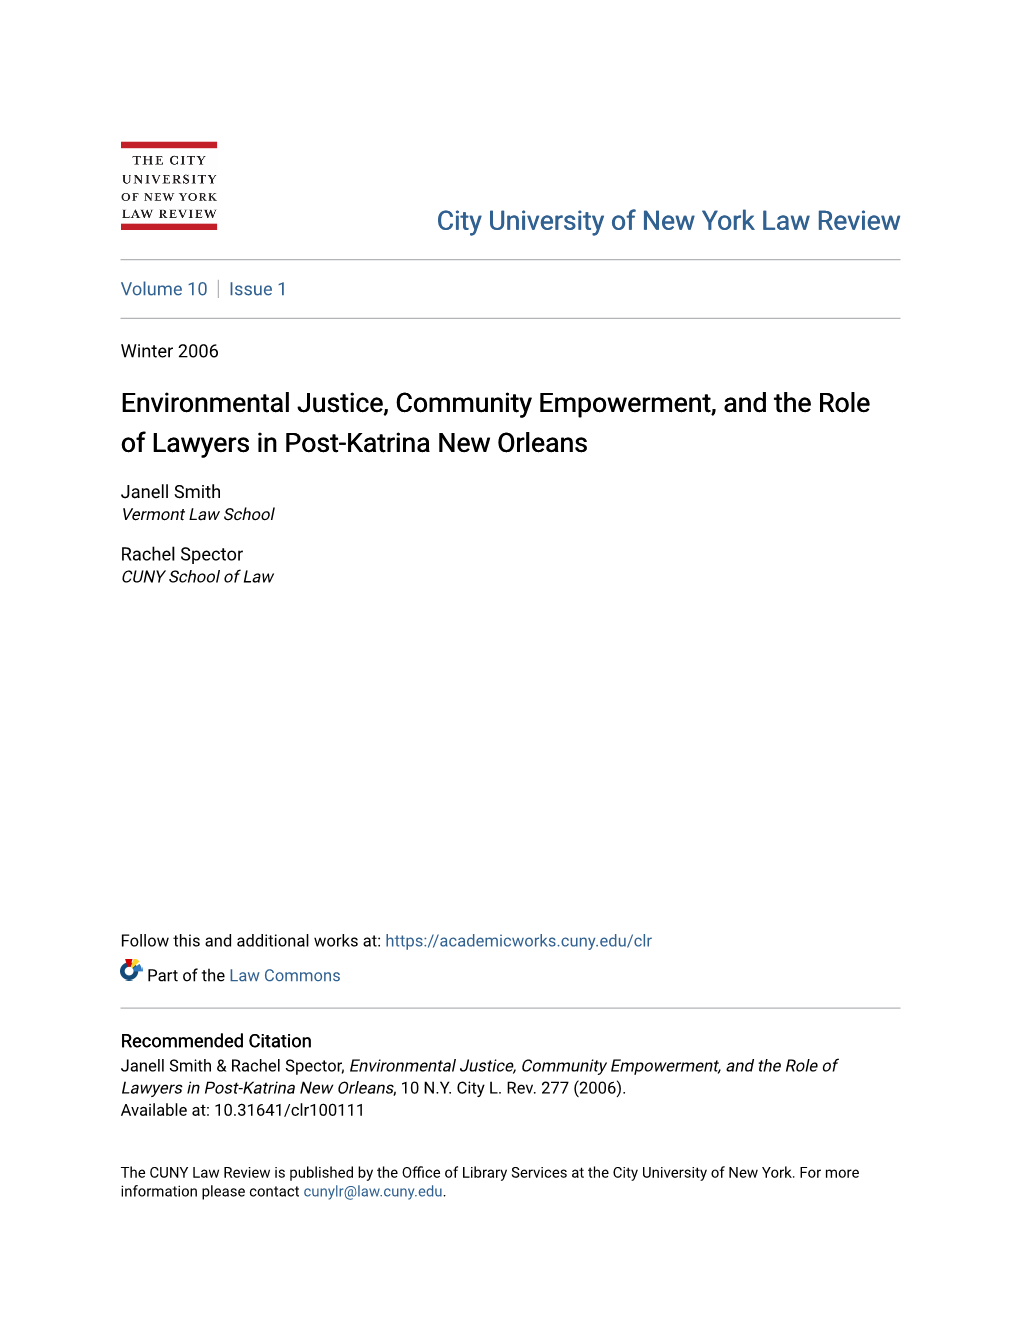 Environmental Justice, Community Empowerment, and the Role of Lawyers in Post-Katrina New Orleans